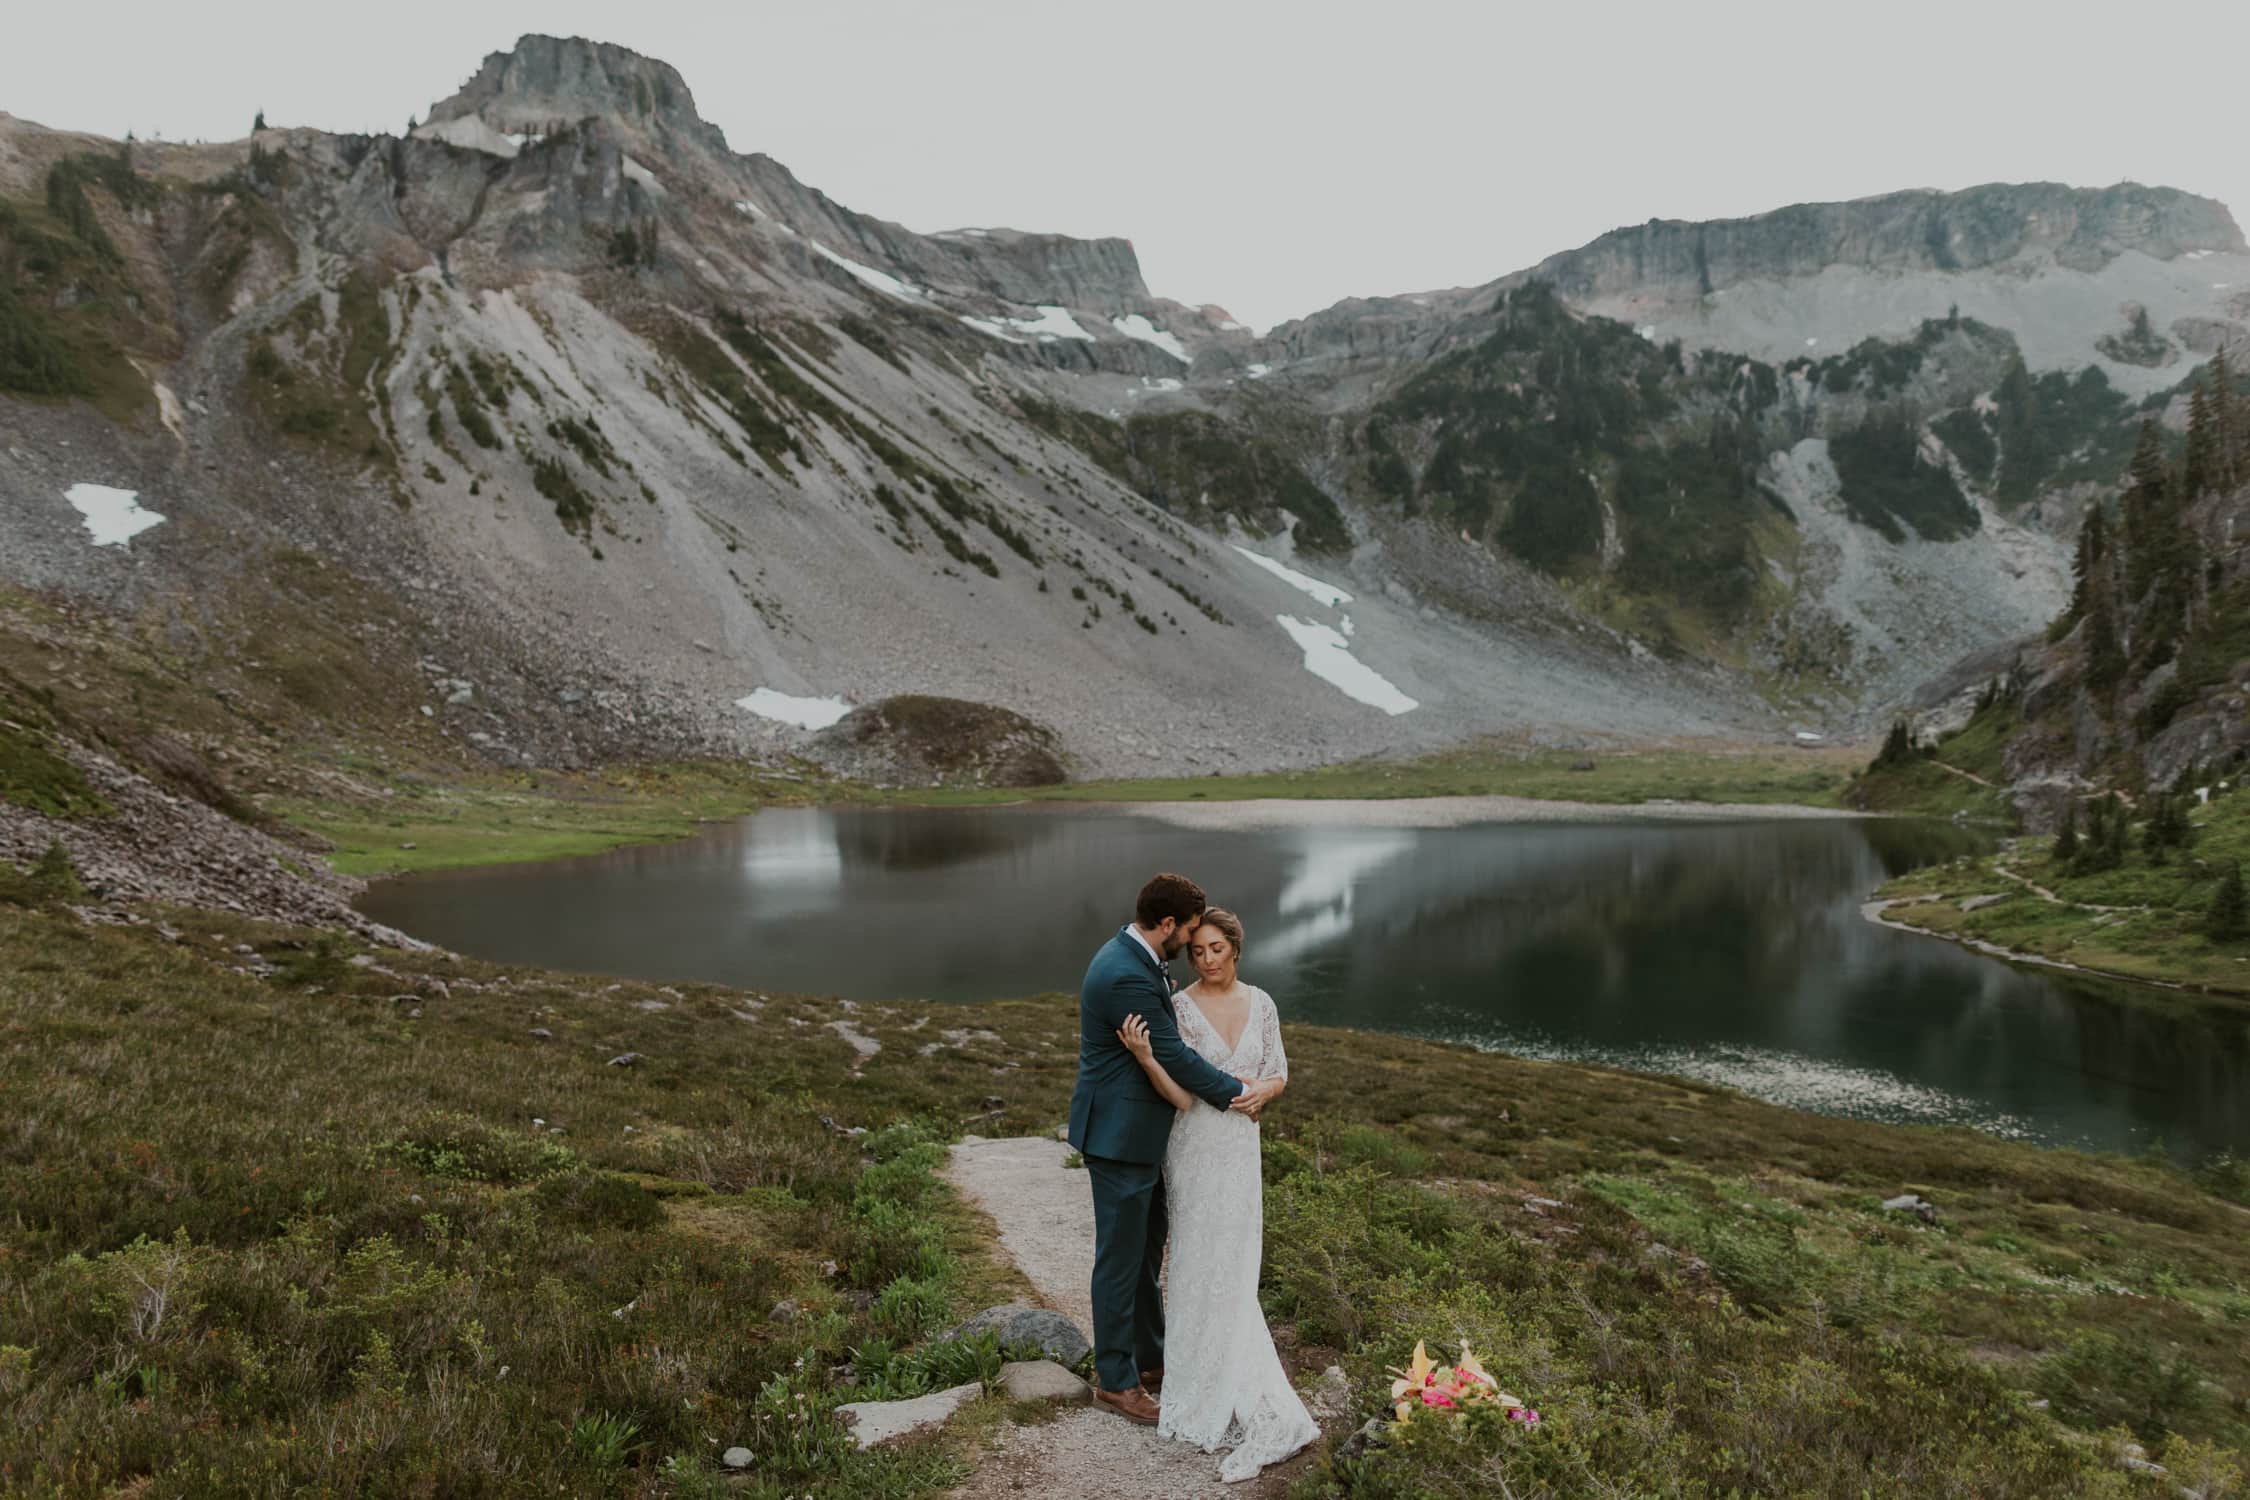 A bride and groom hugging each other in front of Bagley Lakes in North Cascades National Park.